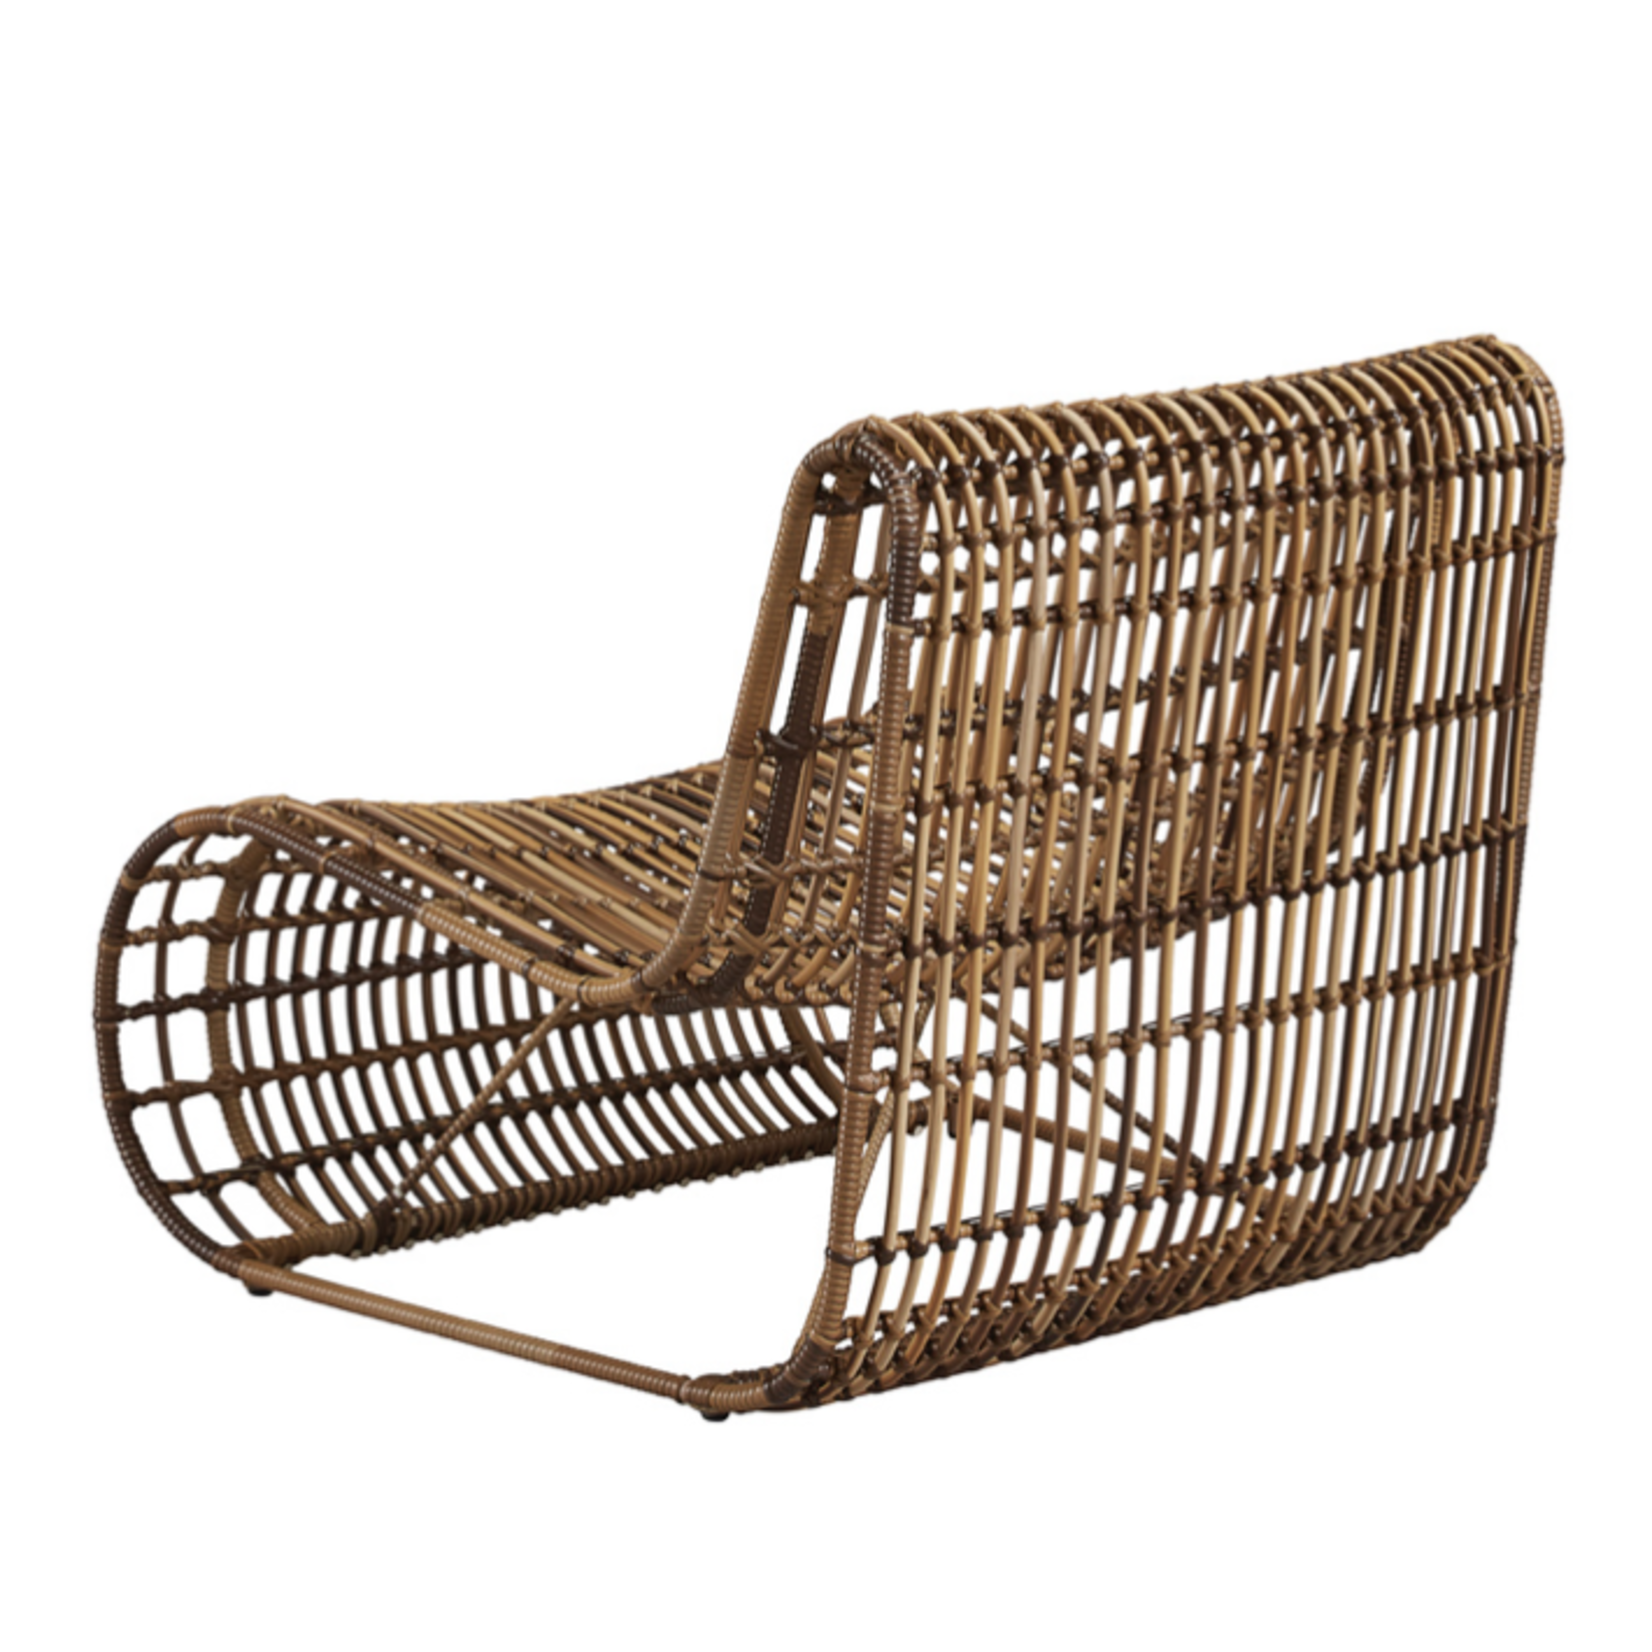 New Realm All Weather Outdoor Lounge Chair